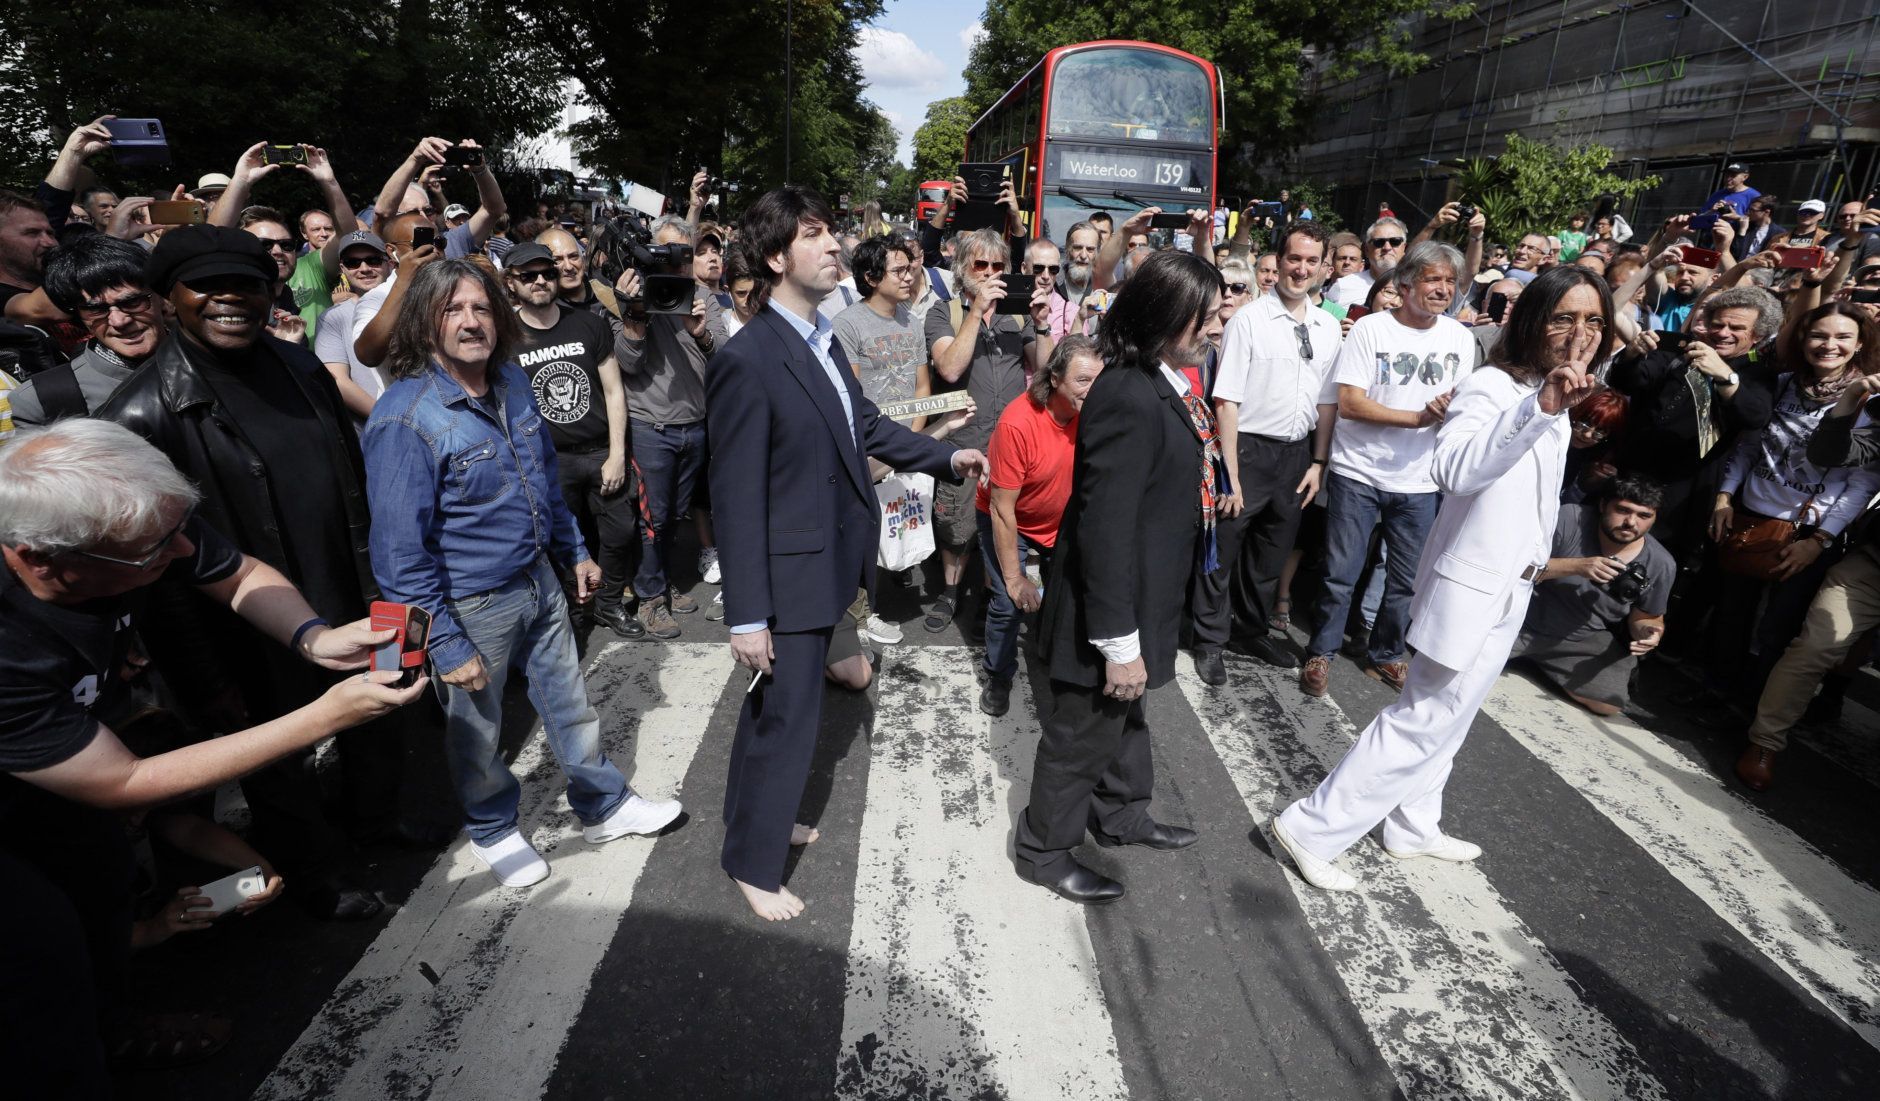 Finding the Fab Four's Abbey Road is not so easy - Washington Times